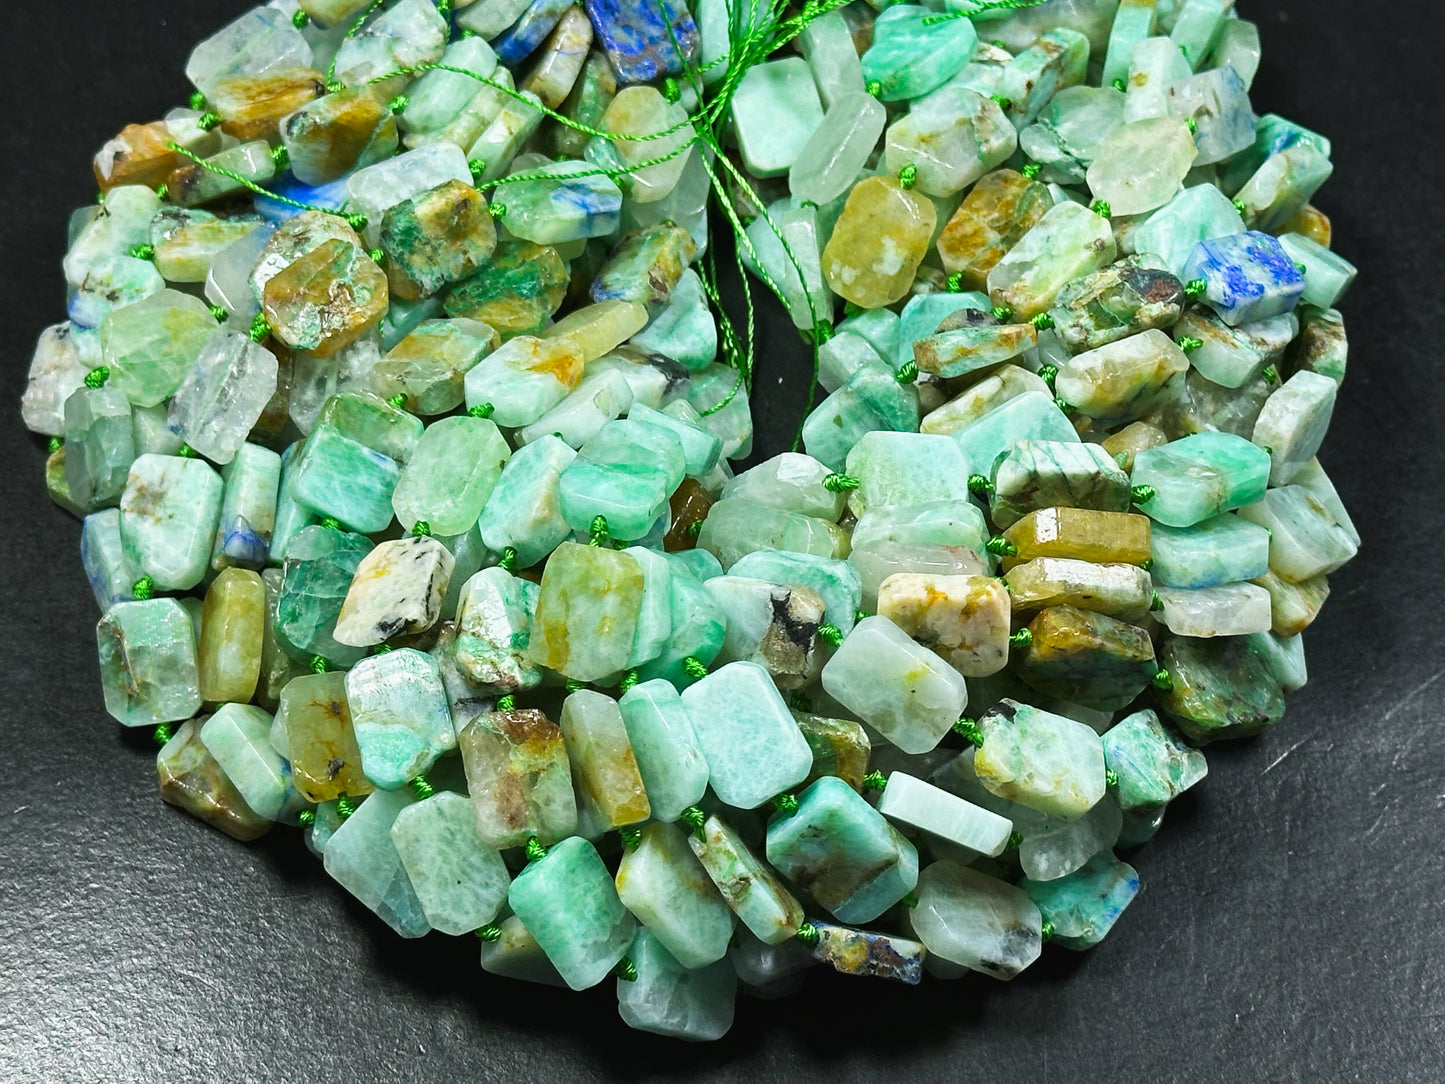 Natural Chrysocolla Gemstone Bead 15x10mm Tablet Shape, Gorgeous Natural Green Blue Color Chrysocolla Bead, Great Quality Full Strand 15.5"